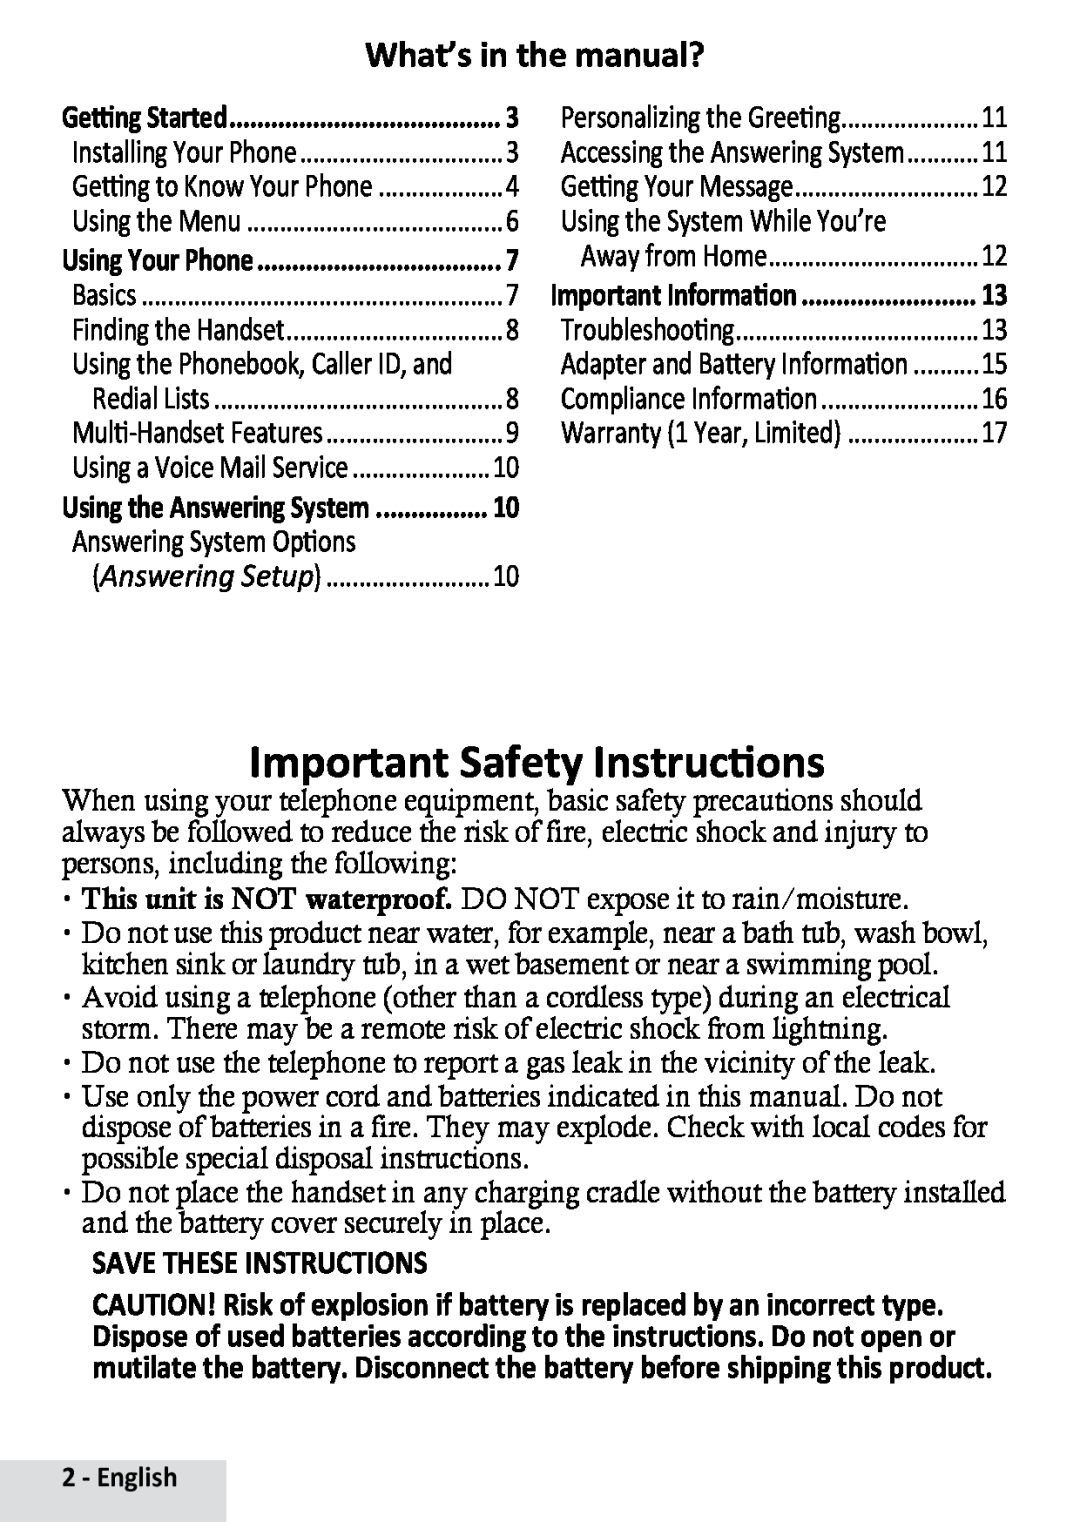 Uniden D1484-4 Important Safety Instructions, What’s in the manual?, Answering System Options, Save These Instructions 